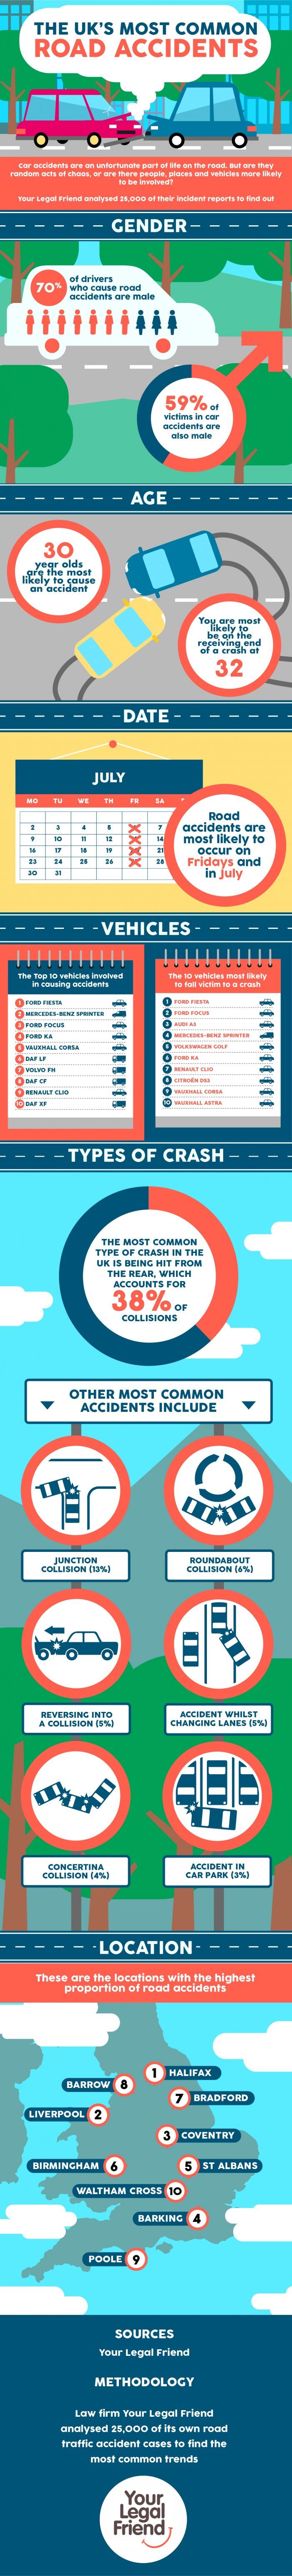 Most Common Road Accidents In The UK Your Legal Friend